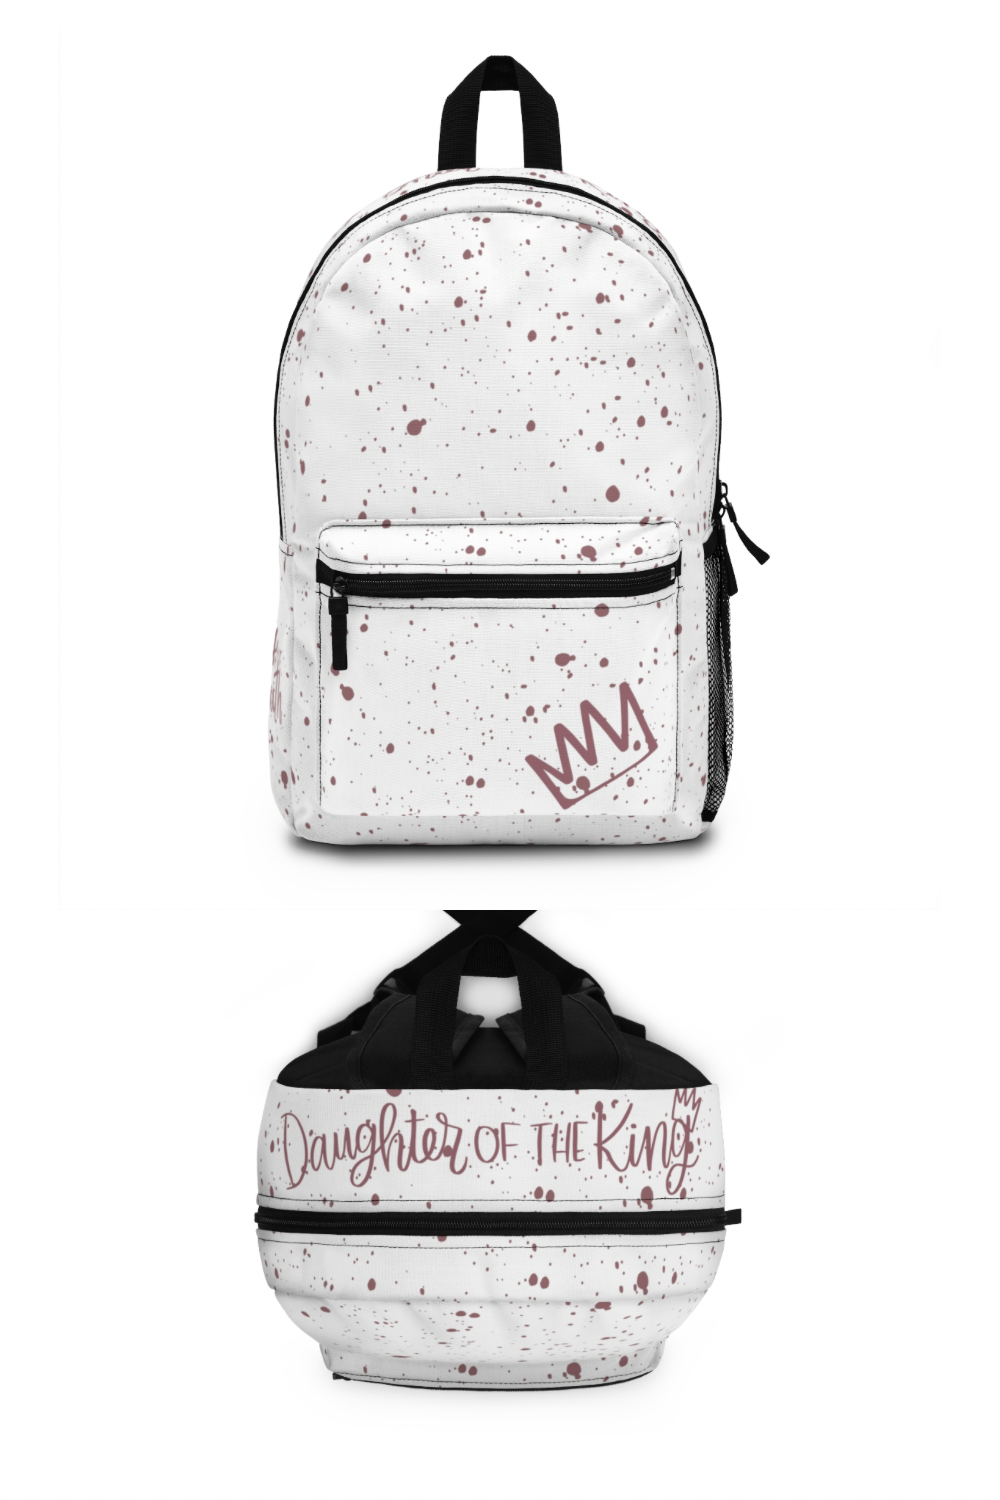 Daughter of the King Backpack - Friends of the Faith